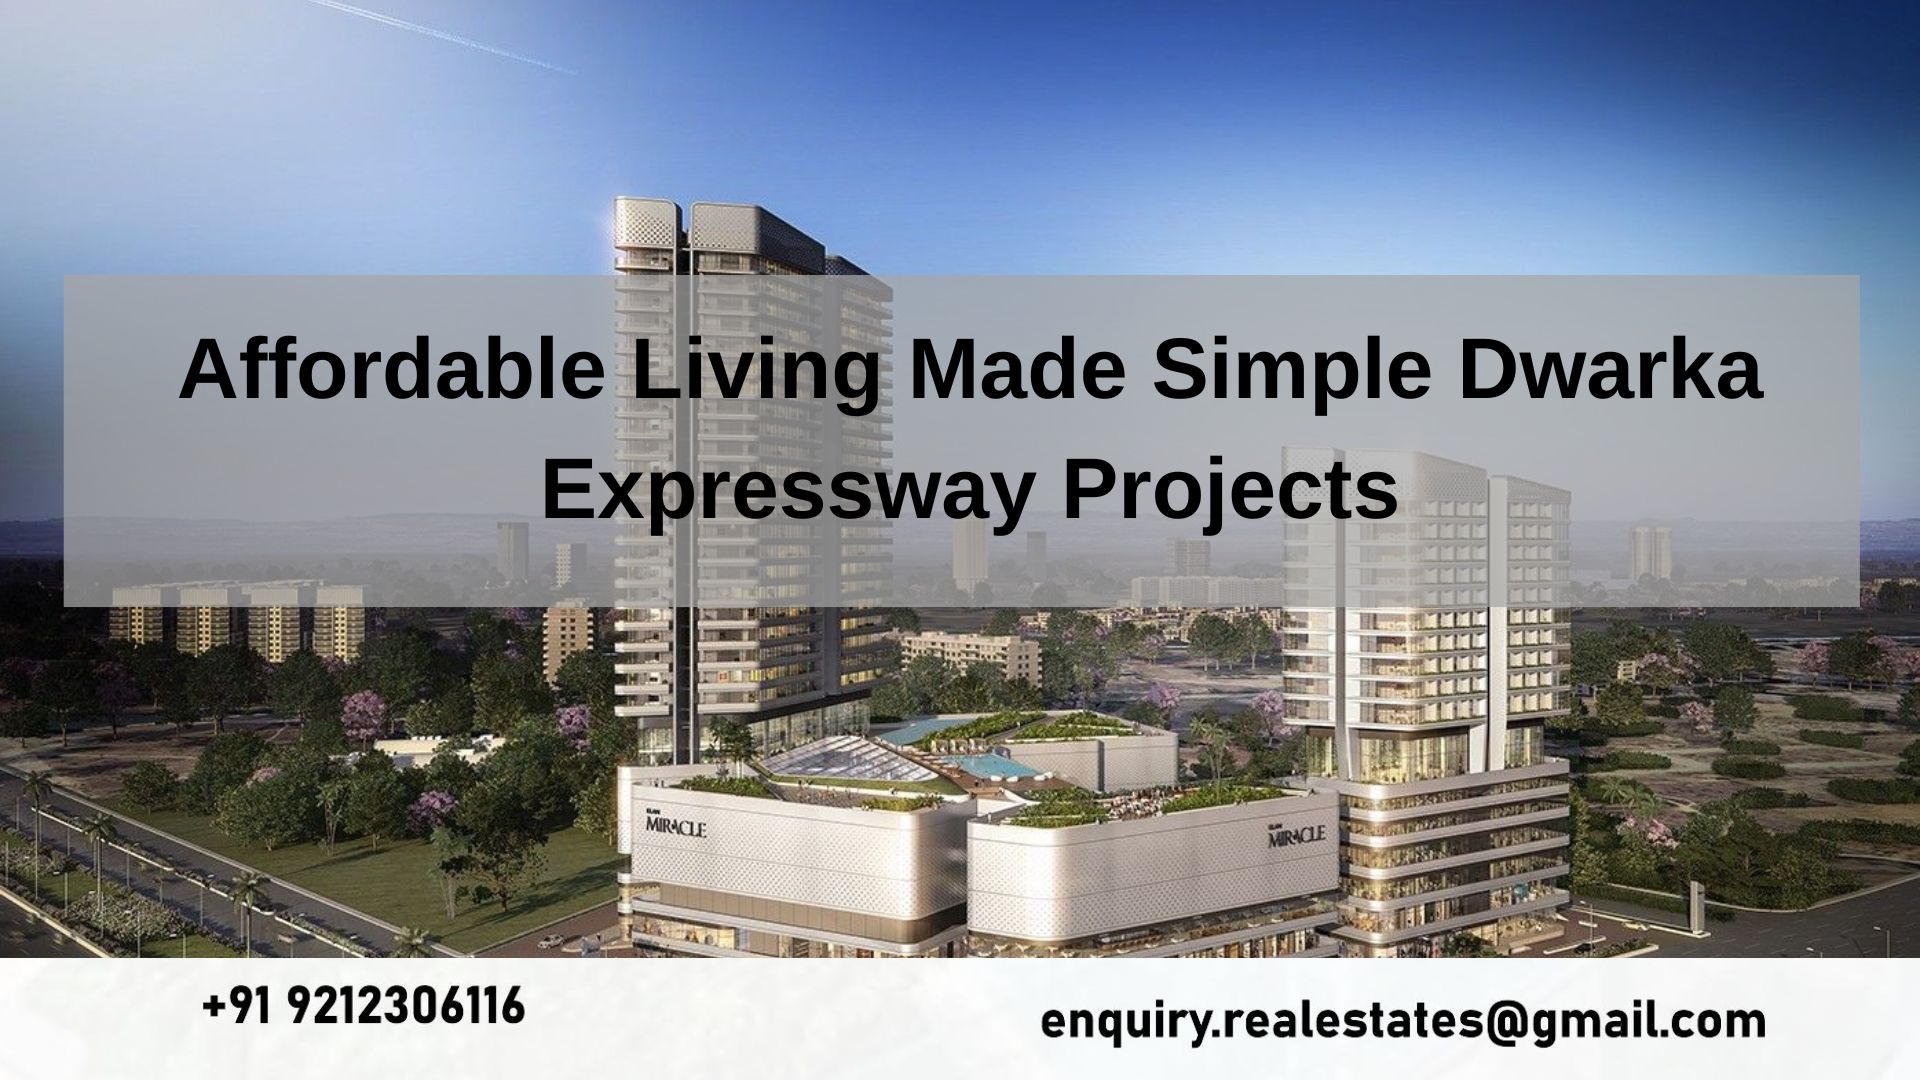 Affordable Living Made Simple Dwarka Expressway Projects